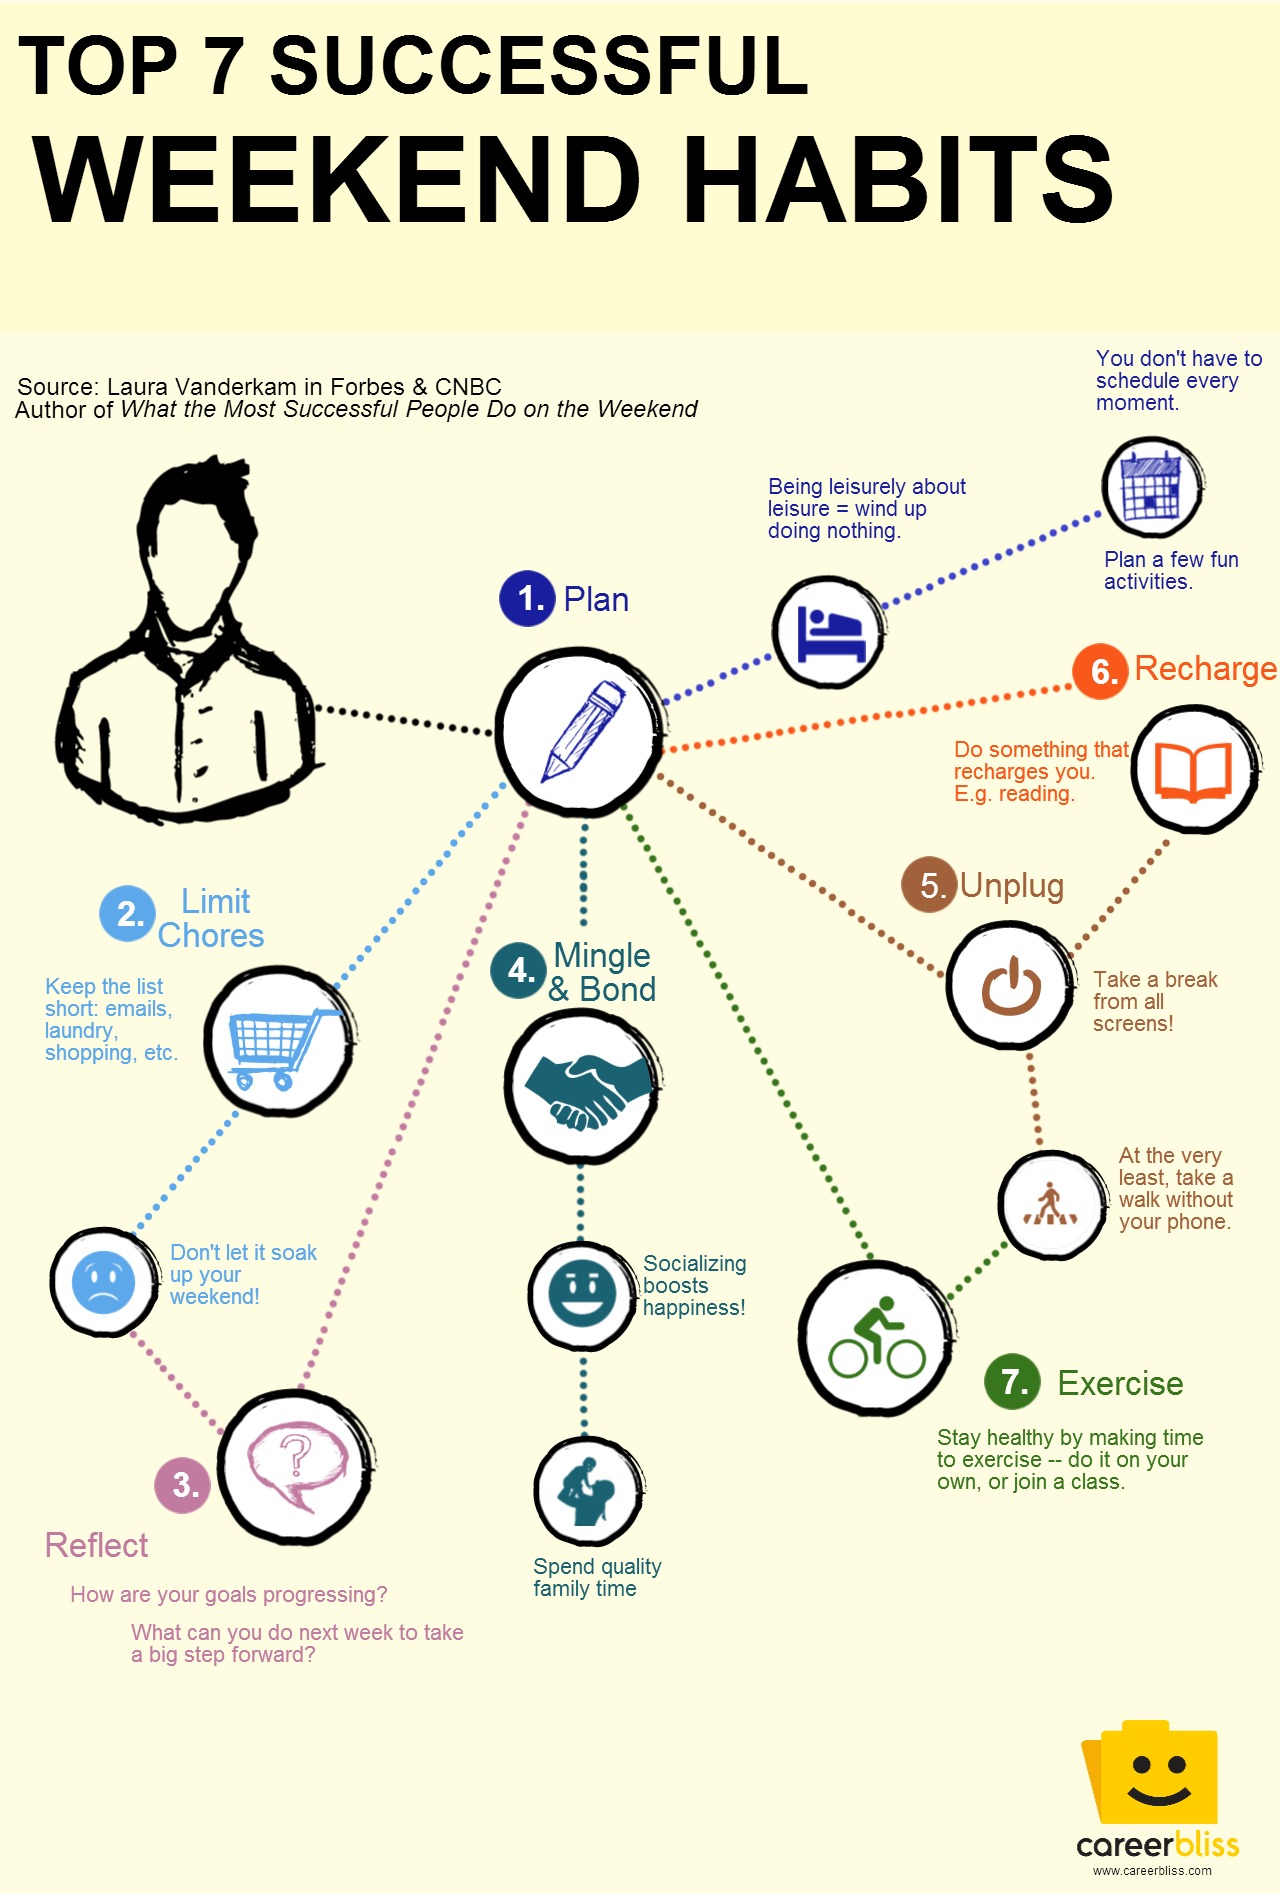 Top 7 Successful Weekend Habits - An Infographic from uCollect InfographicsuCollect Infographics